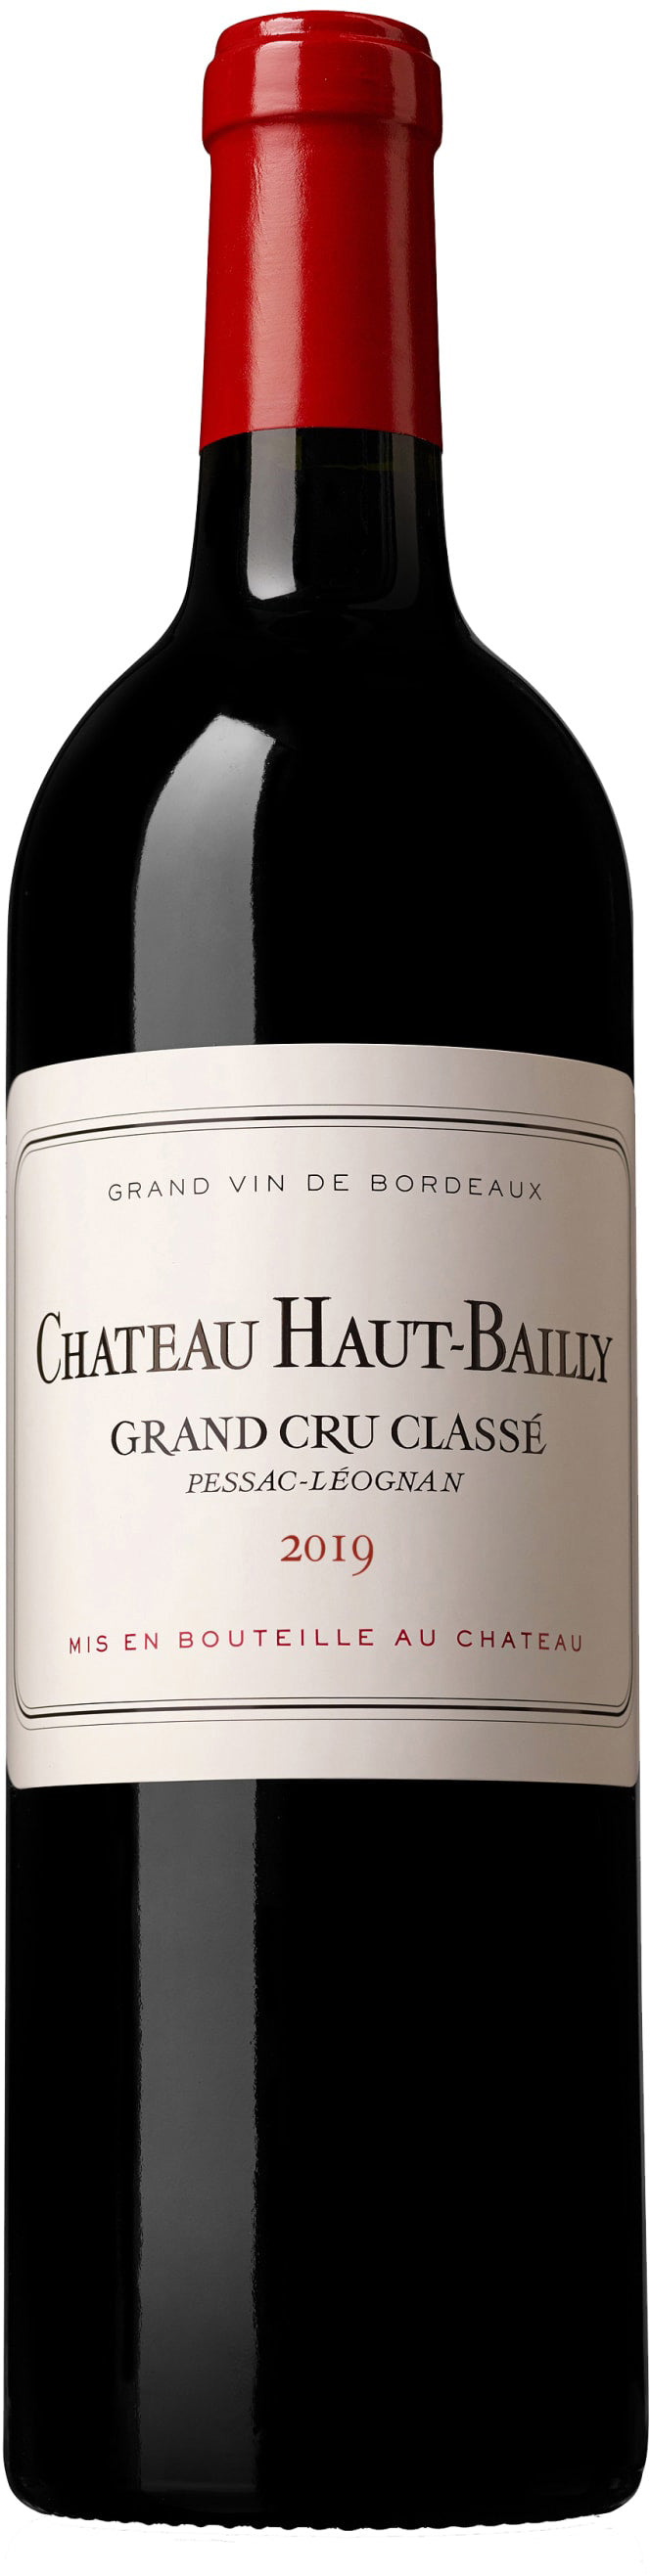 CH HAUT BAILLY